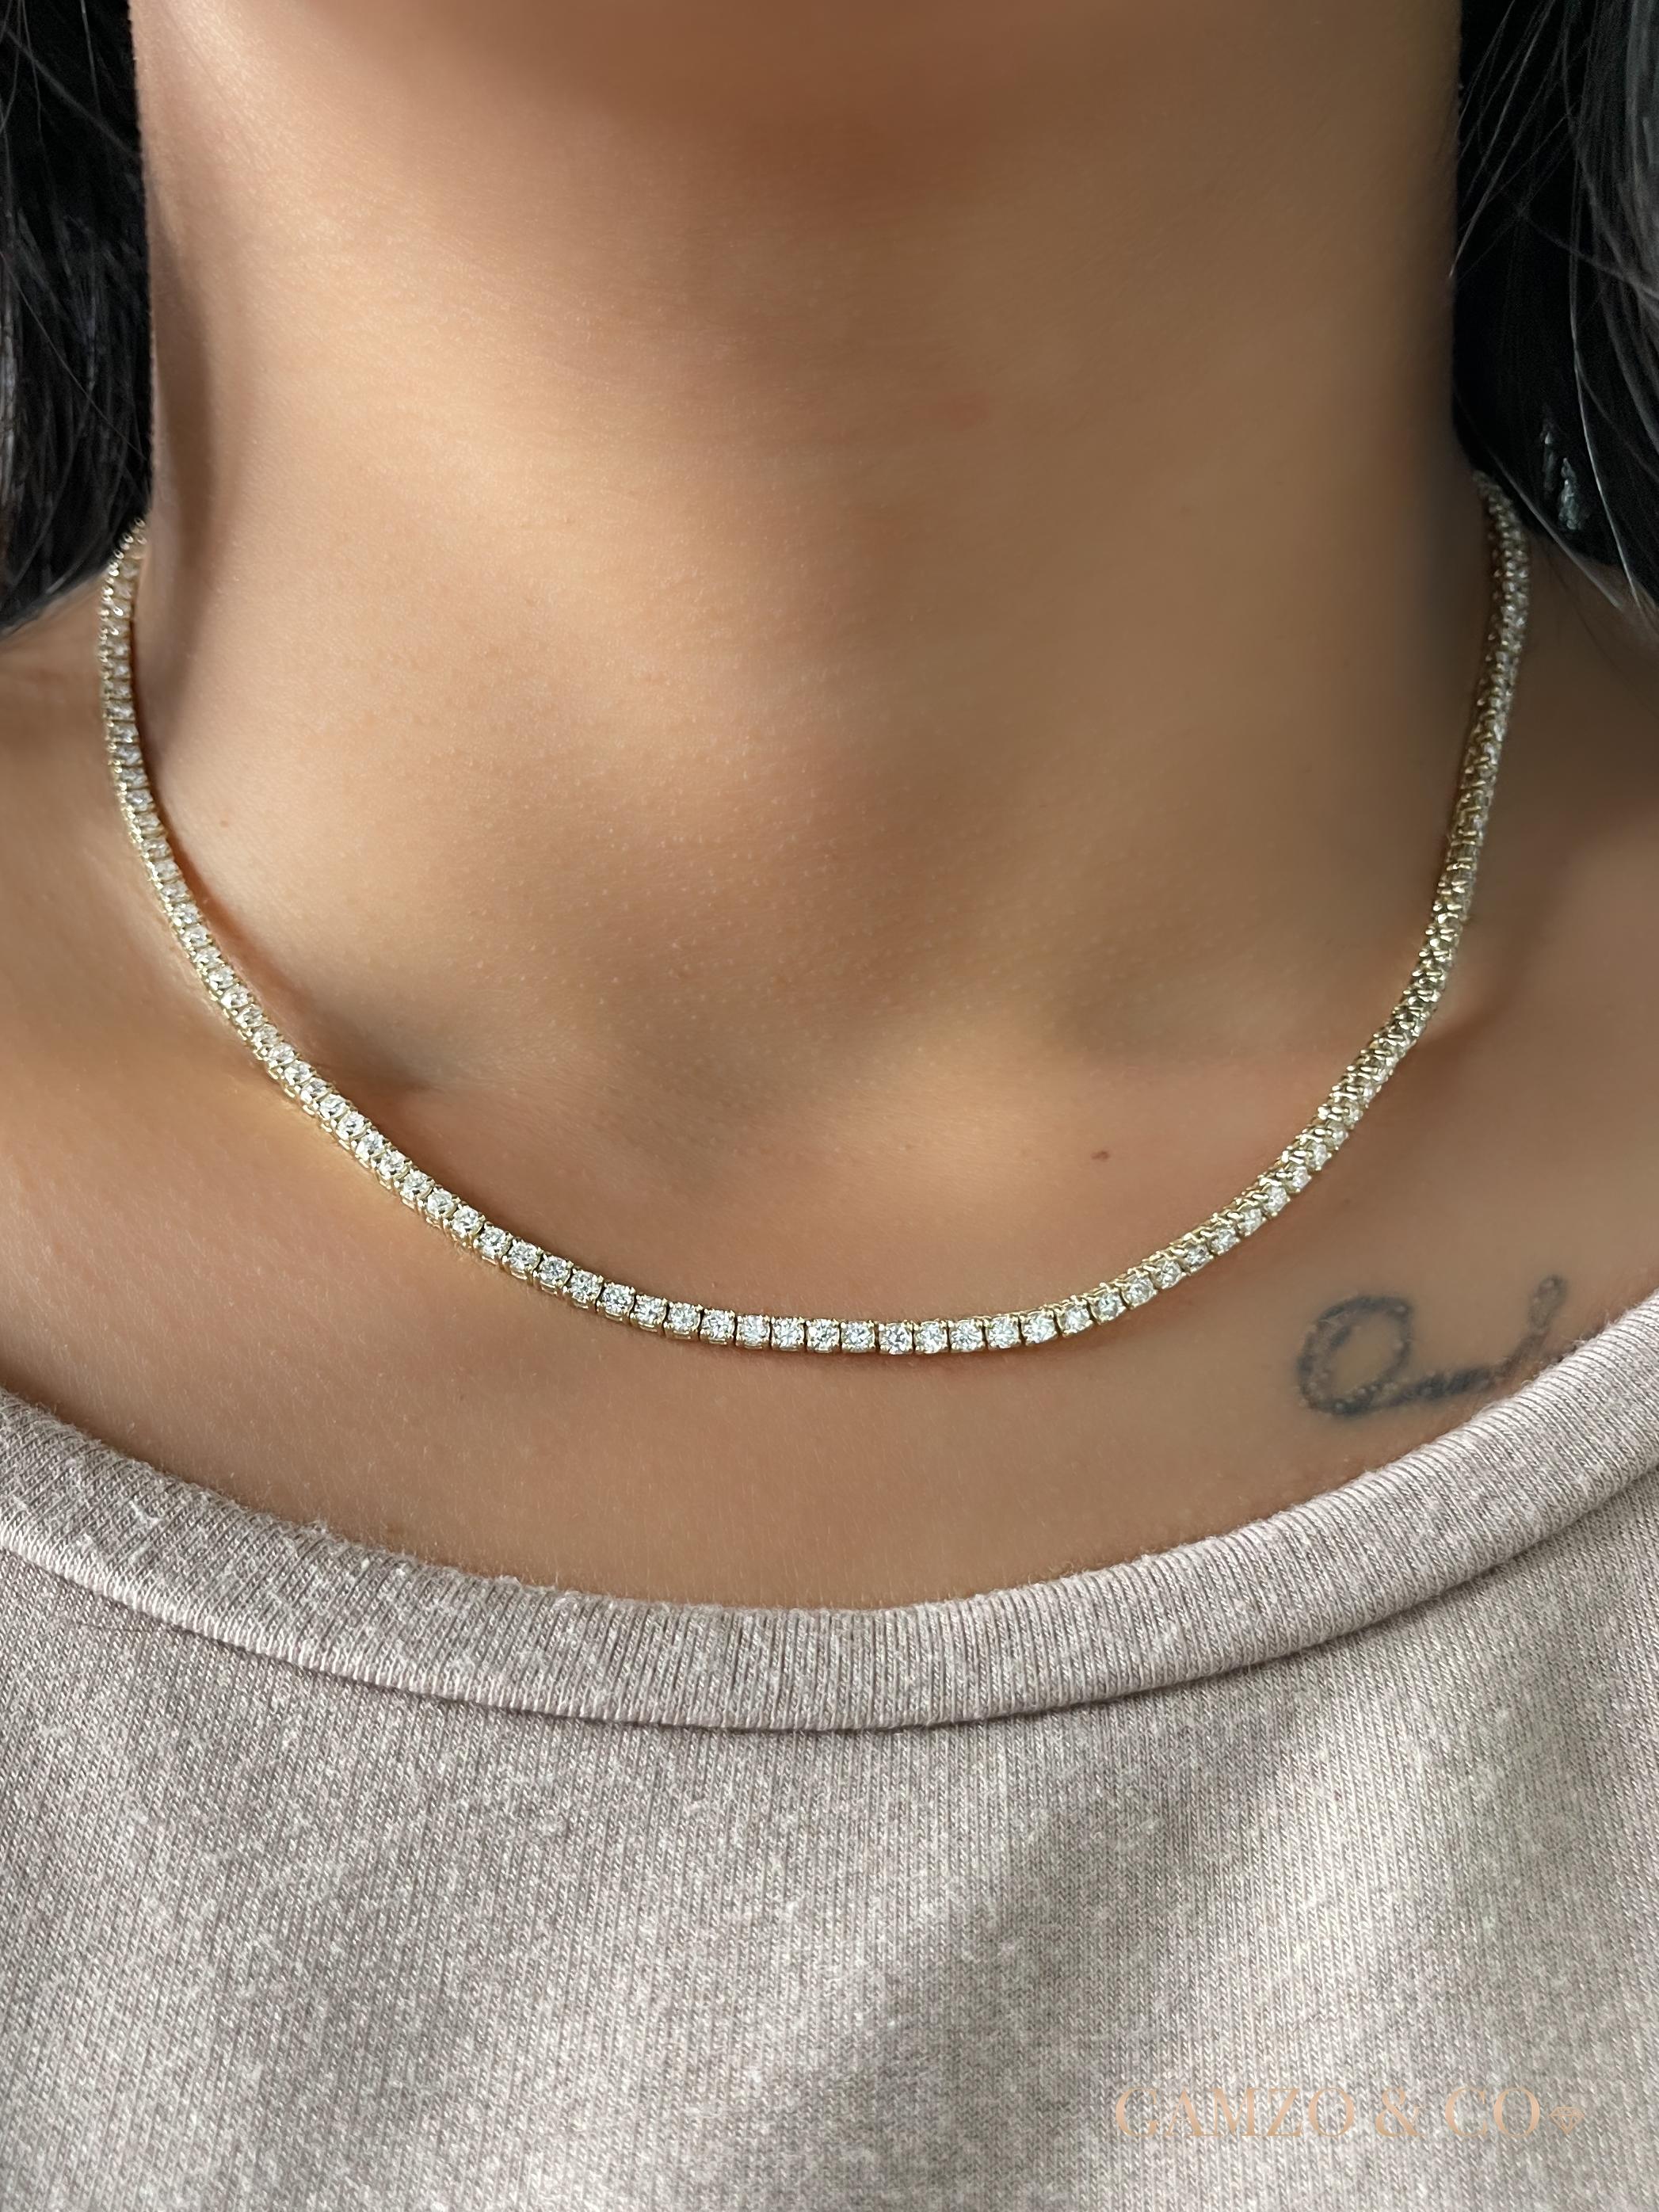 5 Carats of round diamond set on a shared prong setting in 14k white gold to create a timeless necklace. 

Metal: 14k Gold
Diamond Cut: Round
Total Approx. Diamond Carats: 5ct
Diamond Clarity: VS
Diamond Color: F-G
Size: 18
Color: White